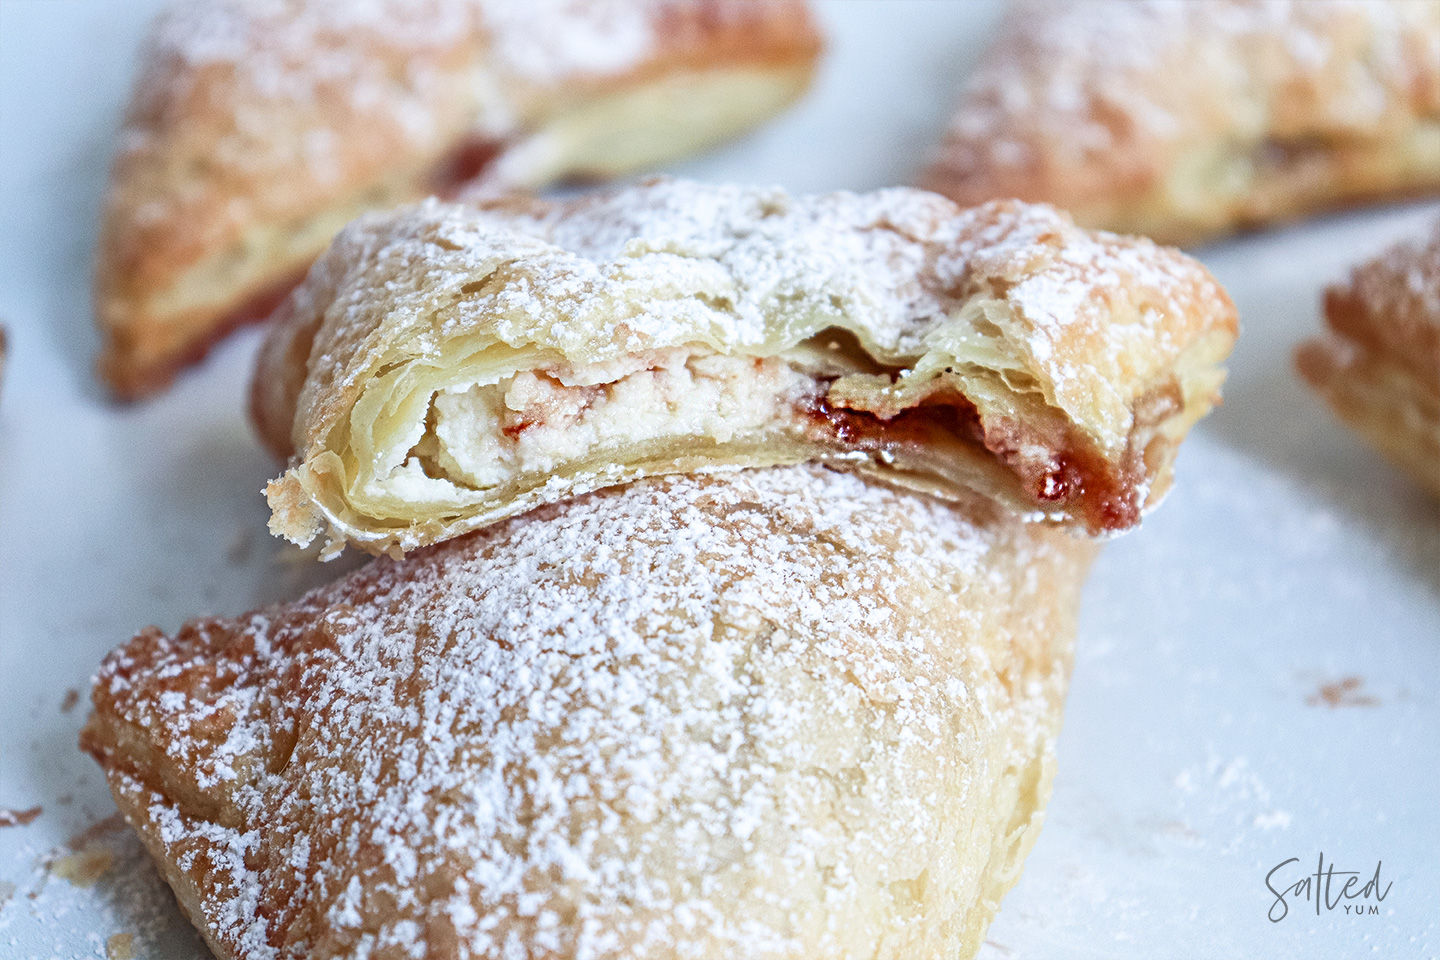 Guava and cheese pastries